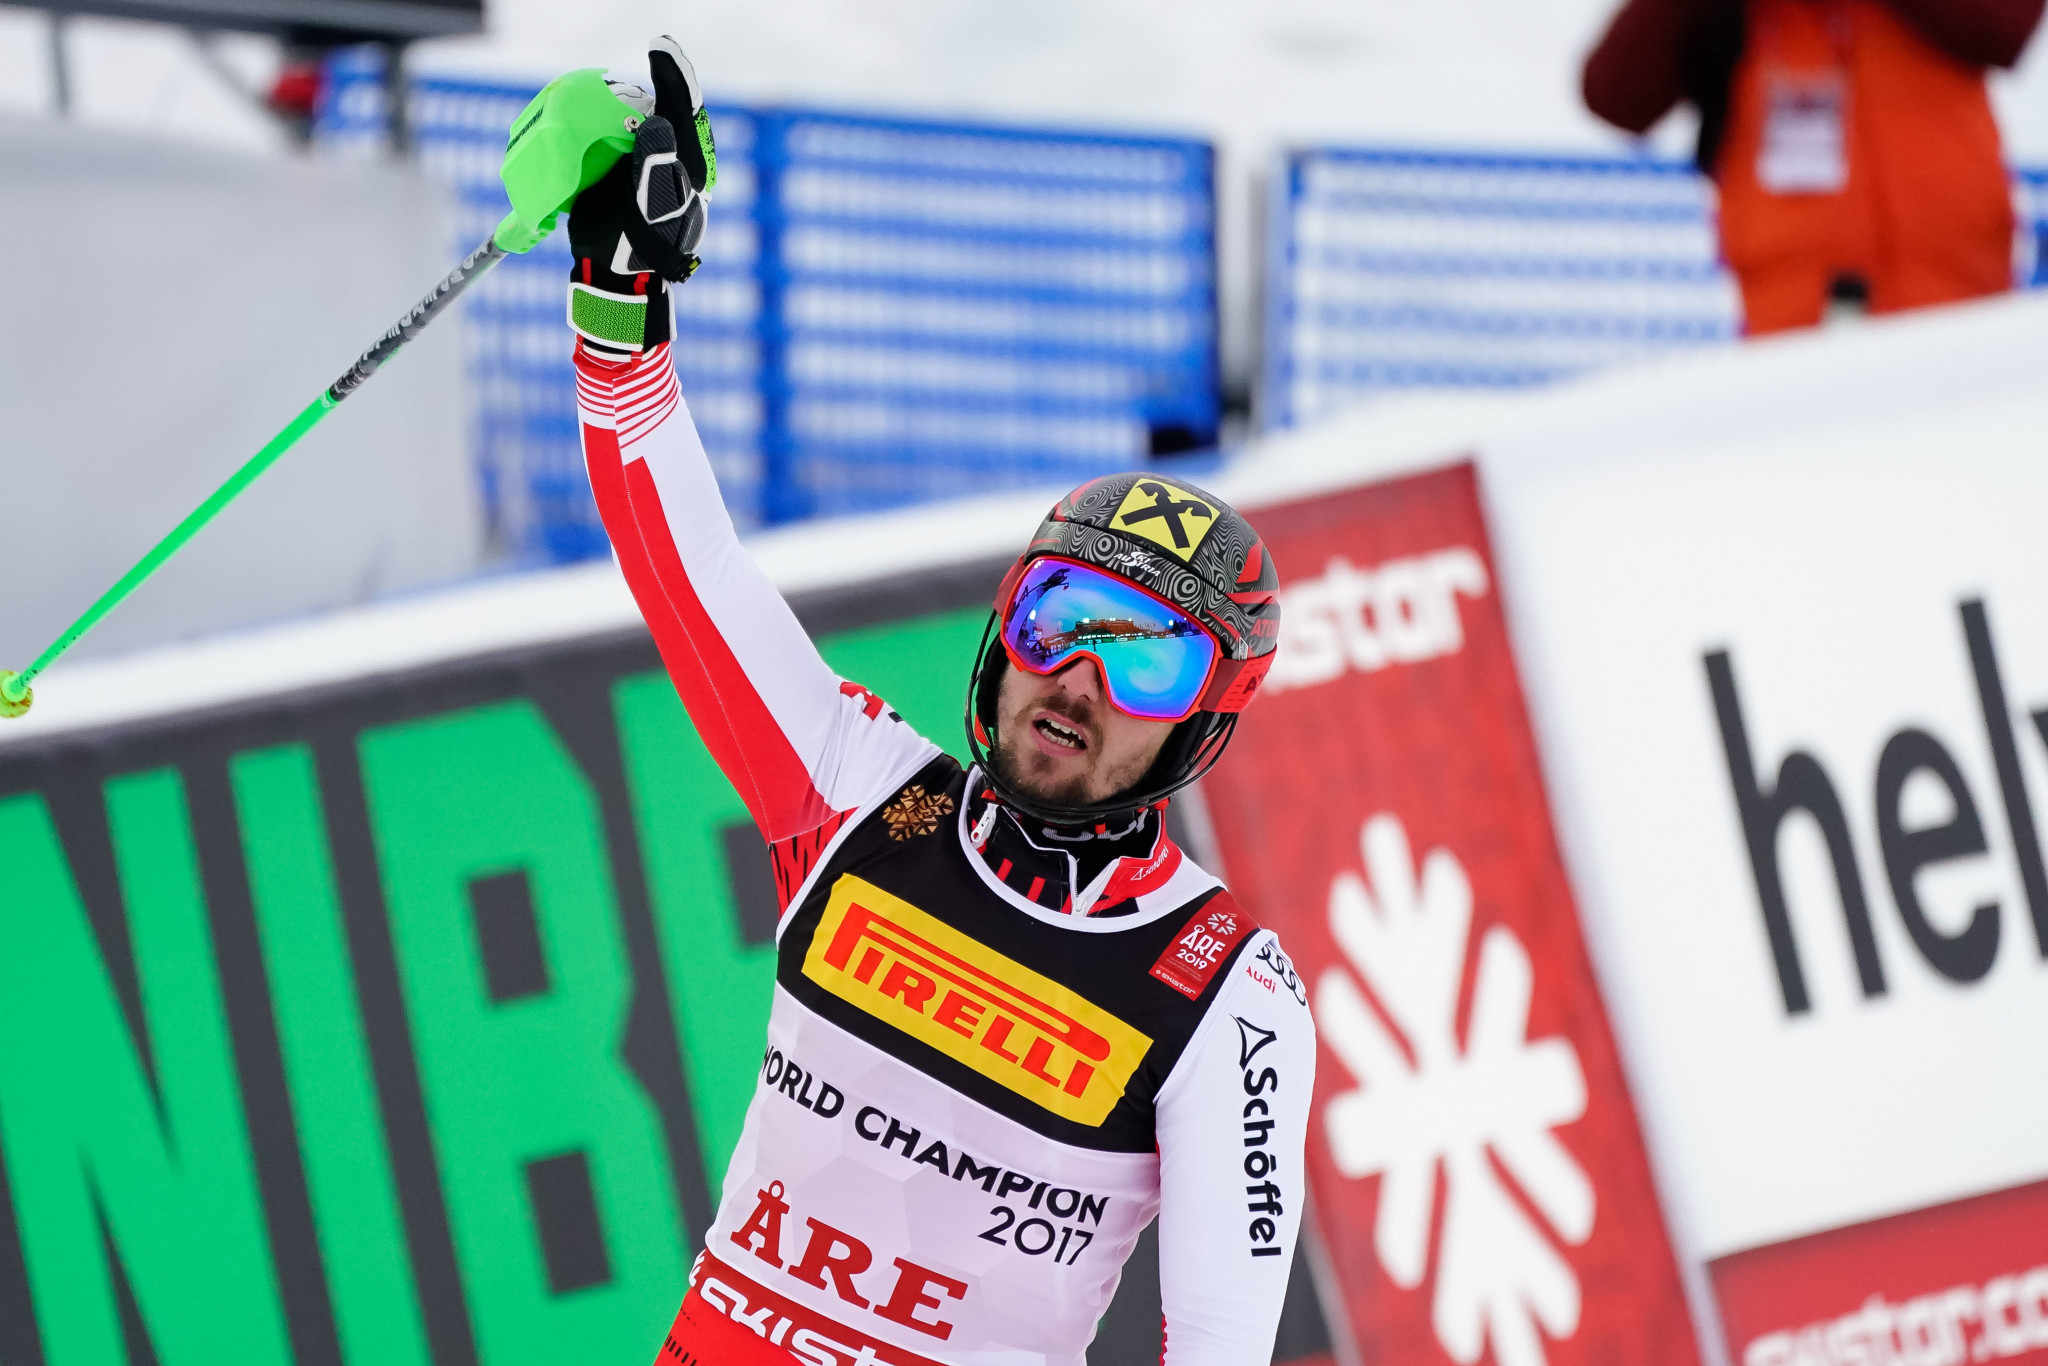 Defending champion Marcel Hirscher produced a superb opening run to take a commanding lead ©Getty Images